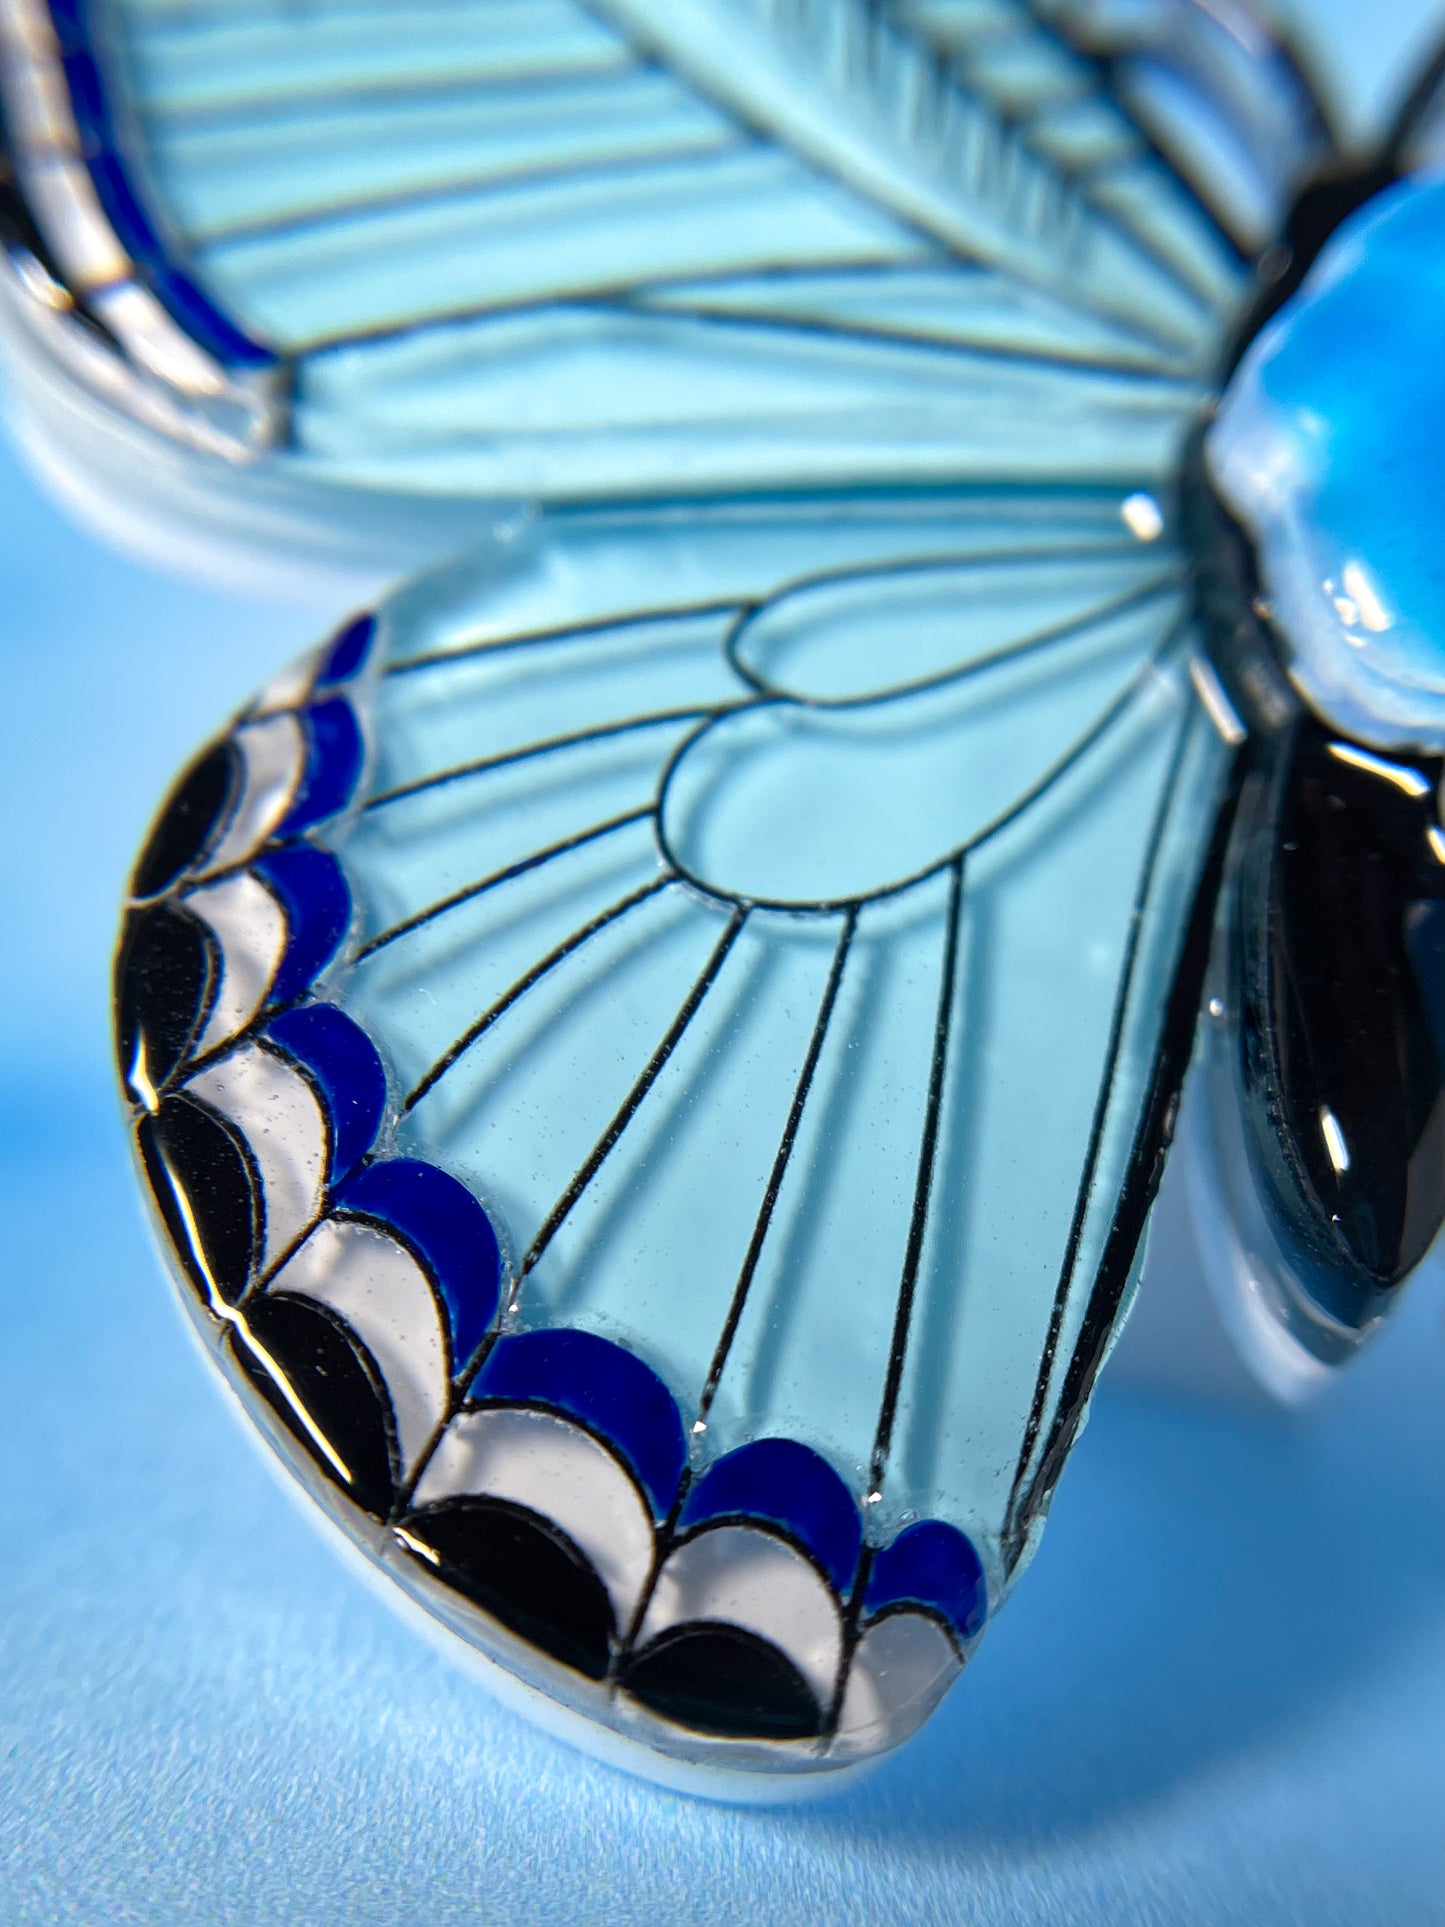 Stained Glass Butterfly Brooch with Anemone